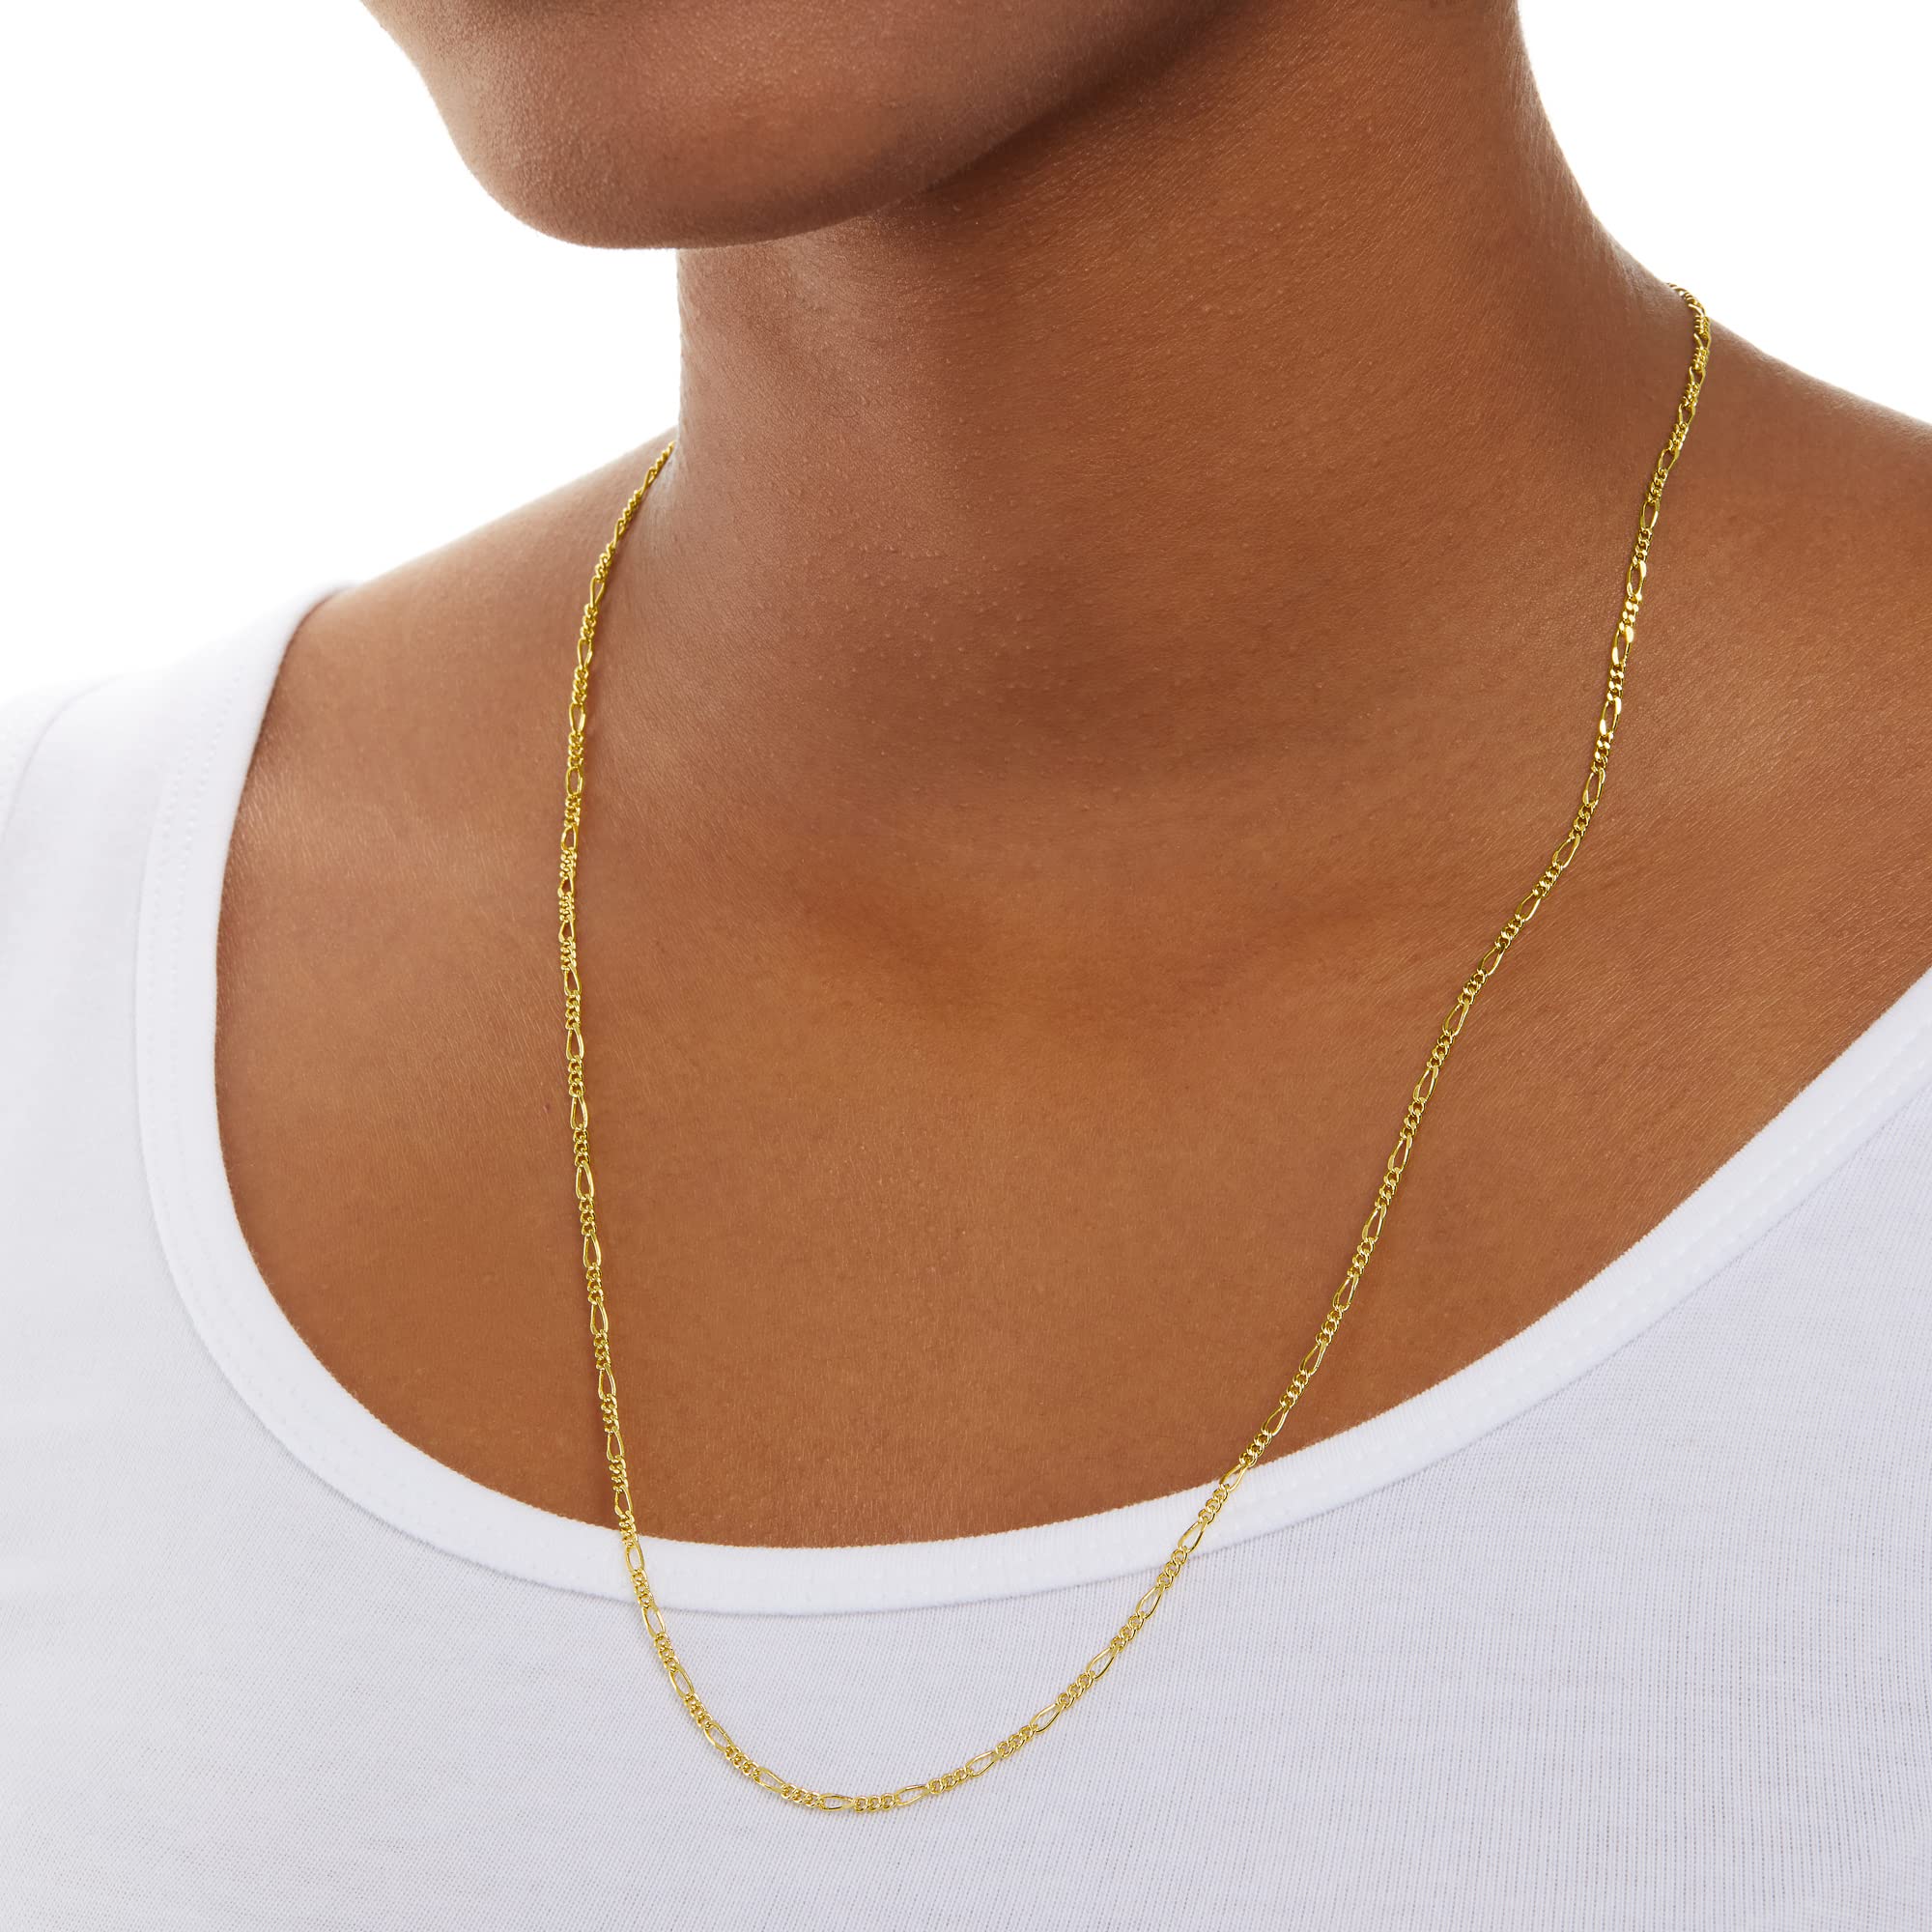 Amazon Essentials 14k Gold or Sterling Silver Plated Figaro Chain 16